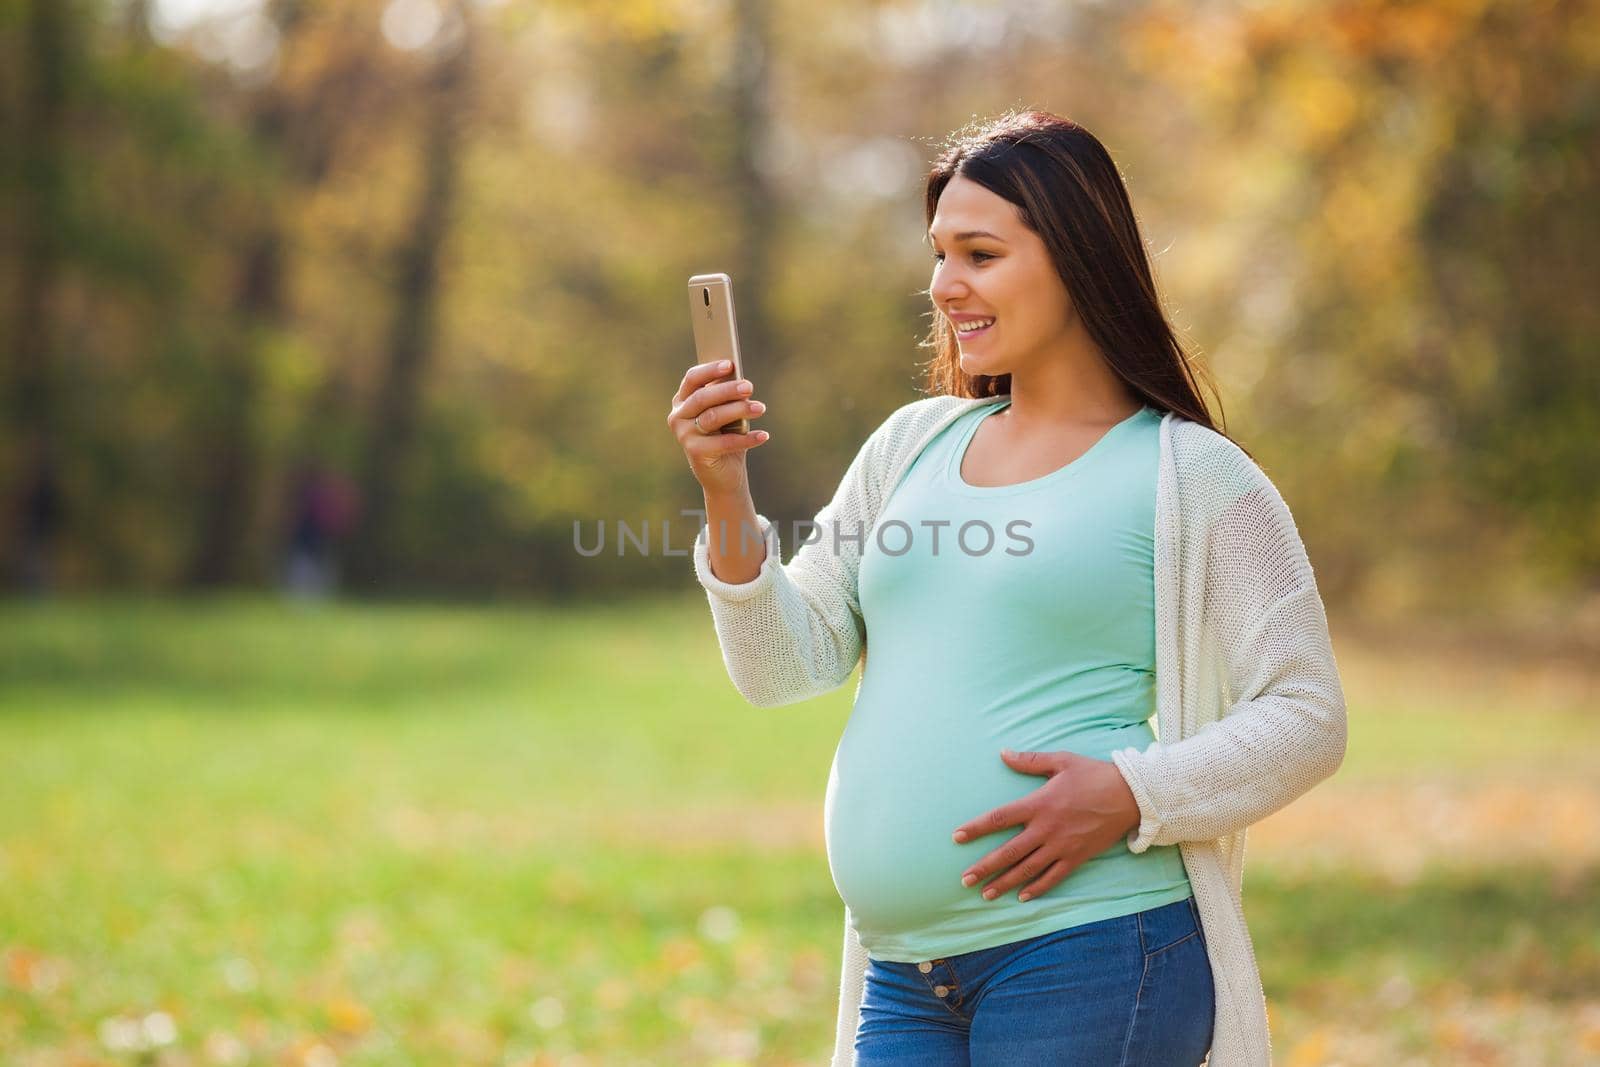 Pregnant woman relaxing in park. She is chatting on smartphone.